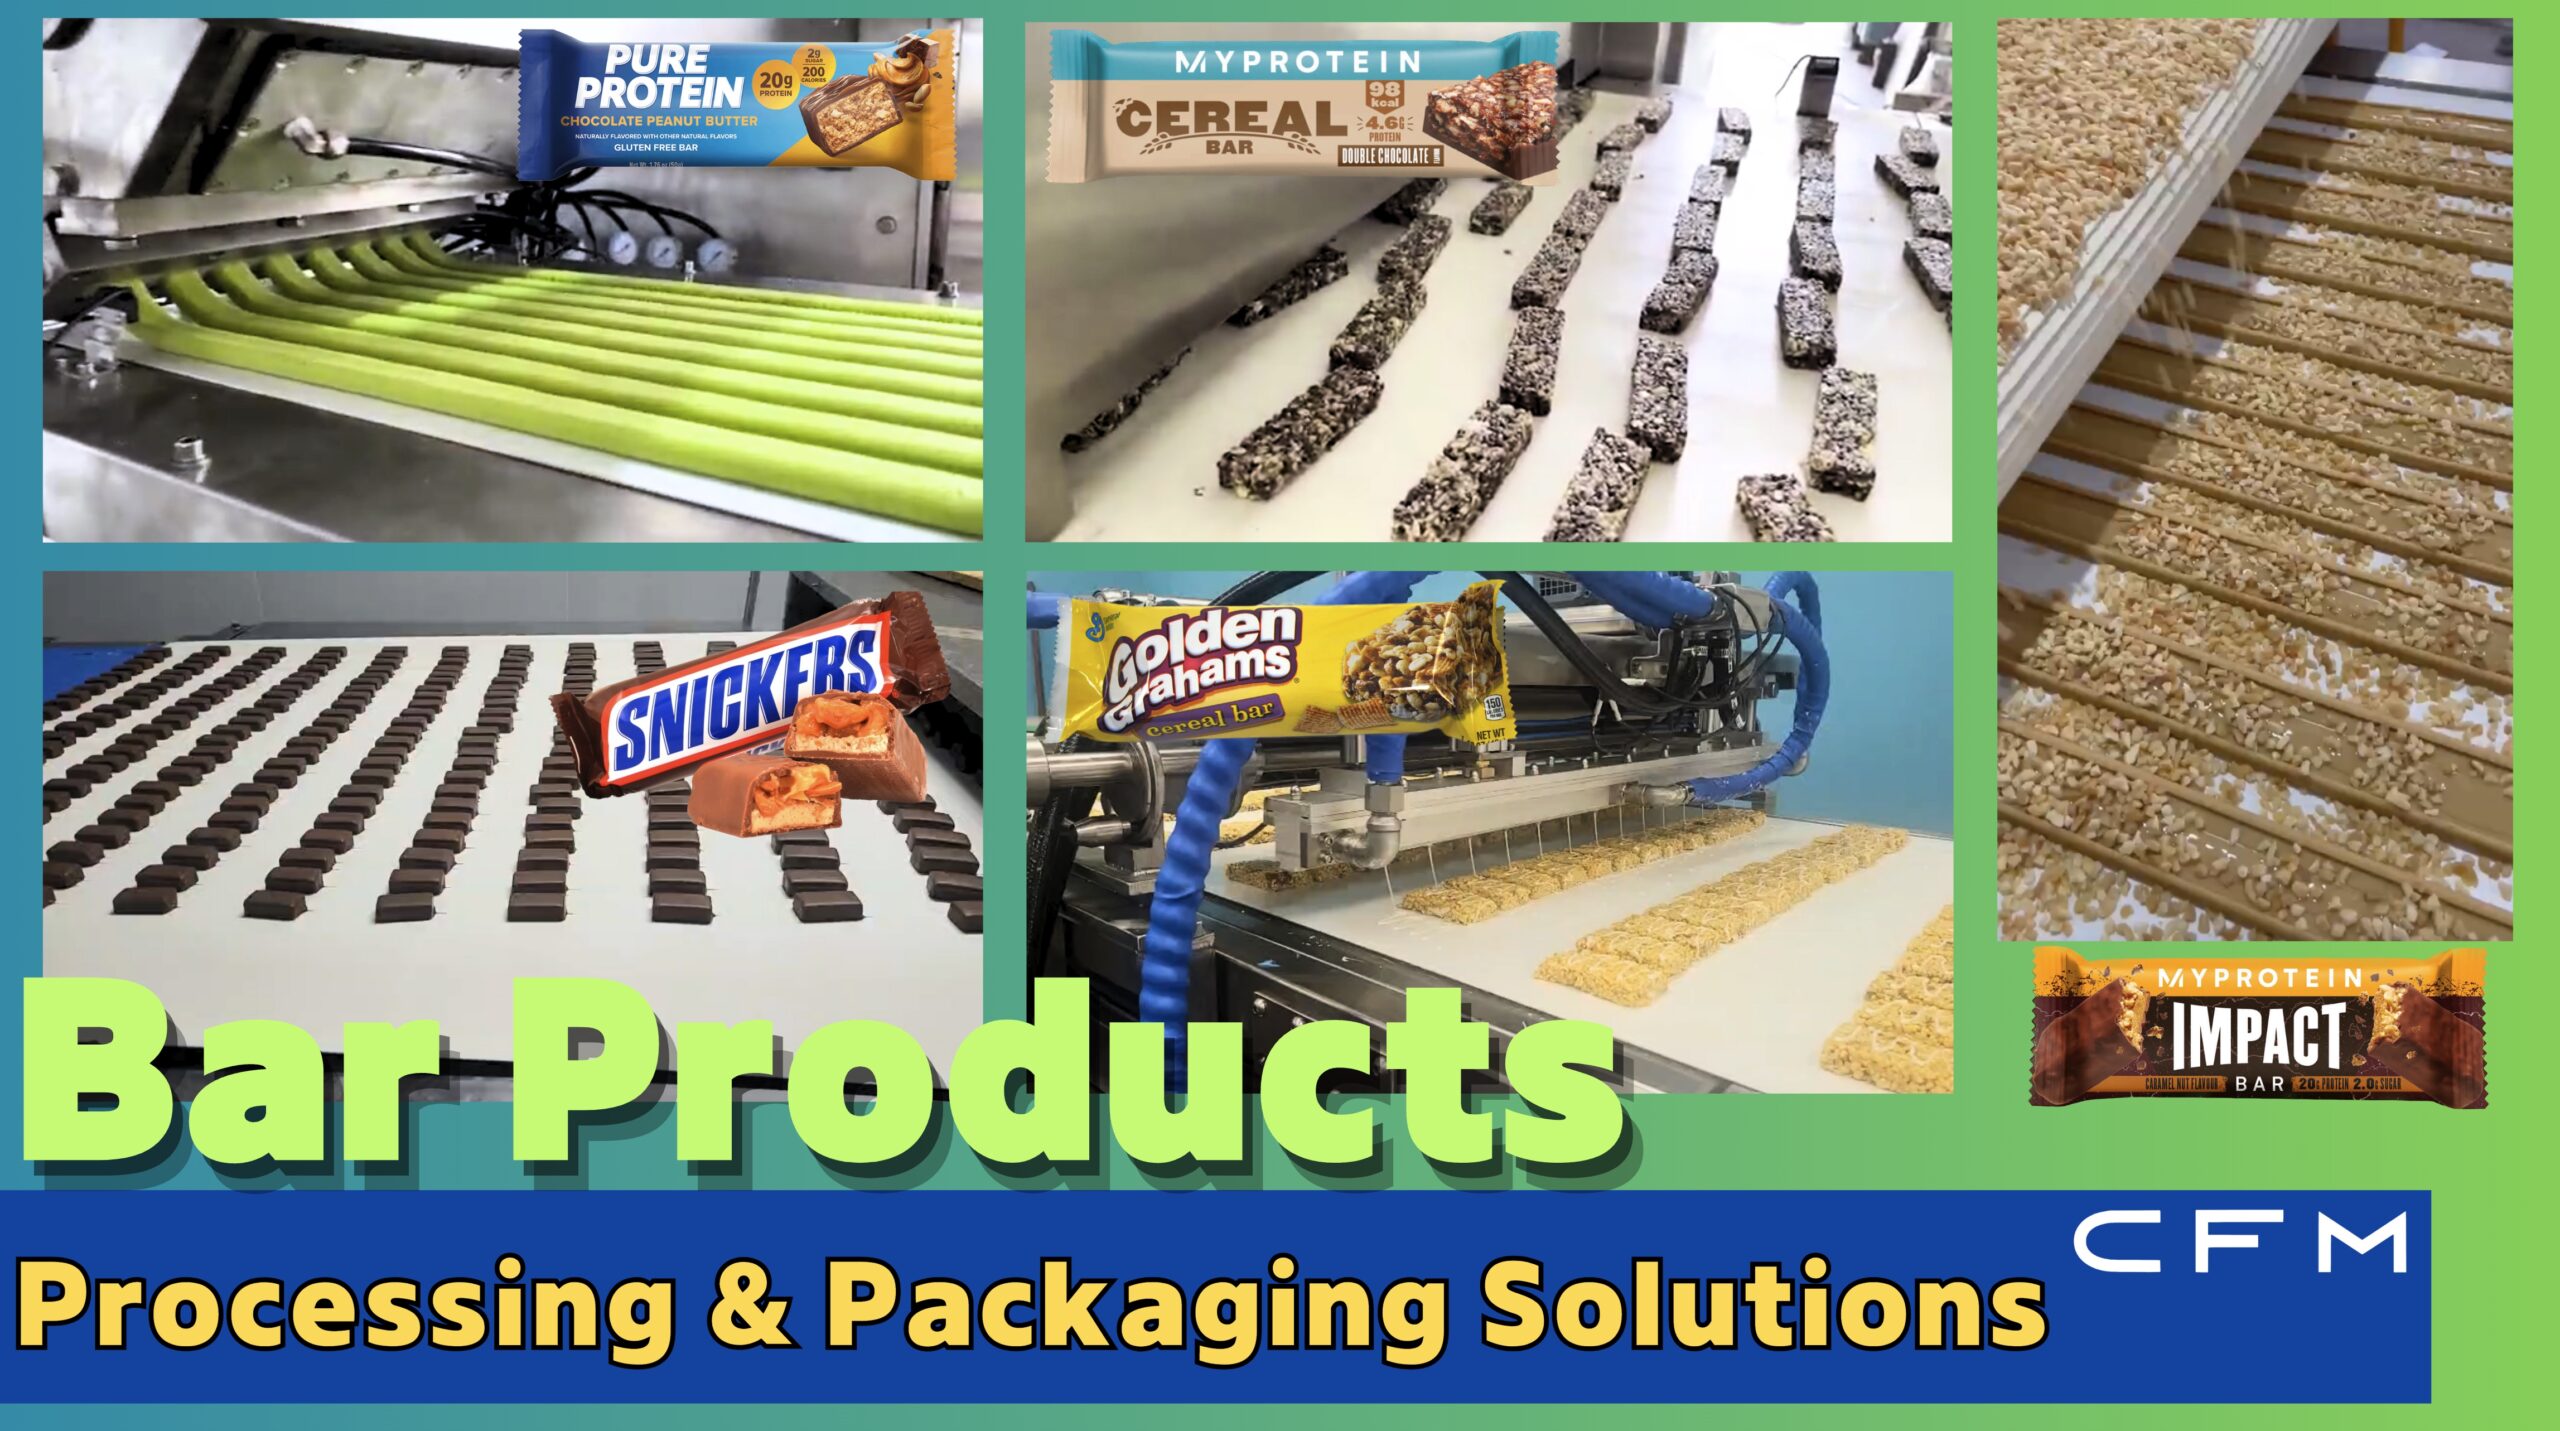 Bar Products processing and packaging solutions